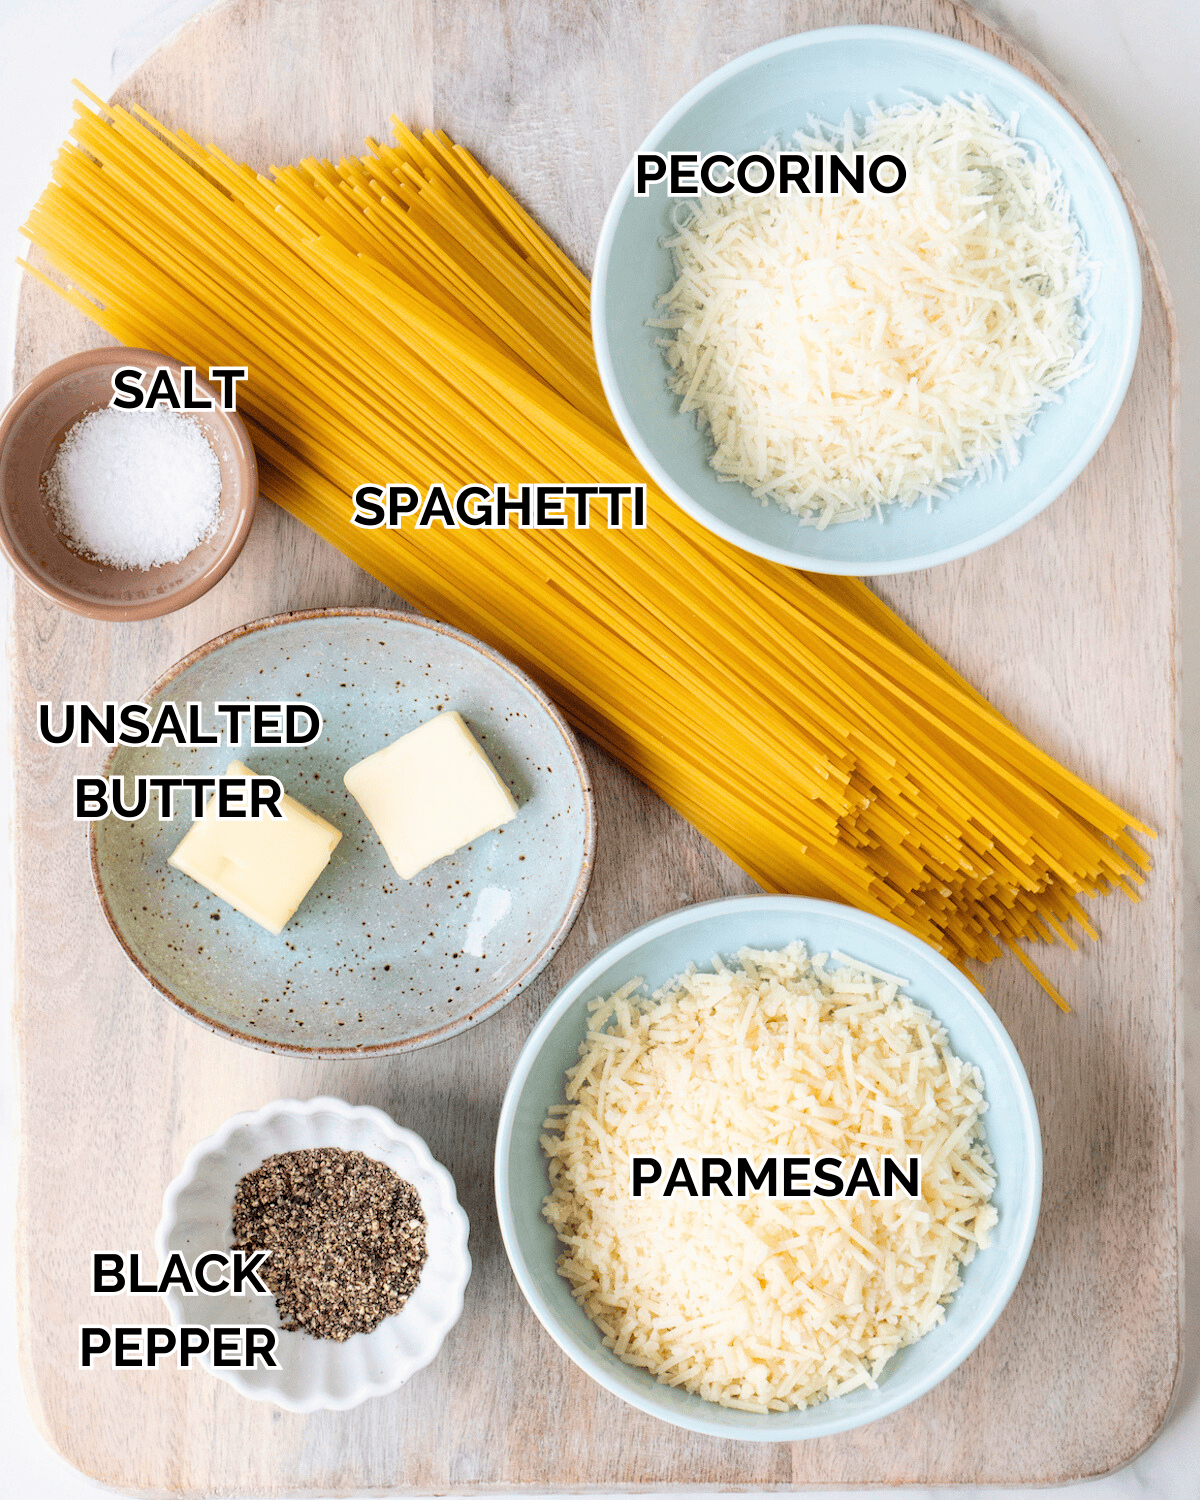 Dry Spaghetti, a bowl of salt, a bowl of pecorino, a bowl of unsalted butter, a bowl of black pepper, and a bowl of grated parmesan.  